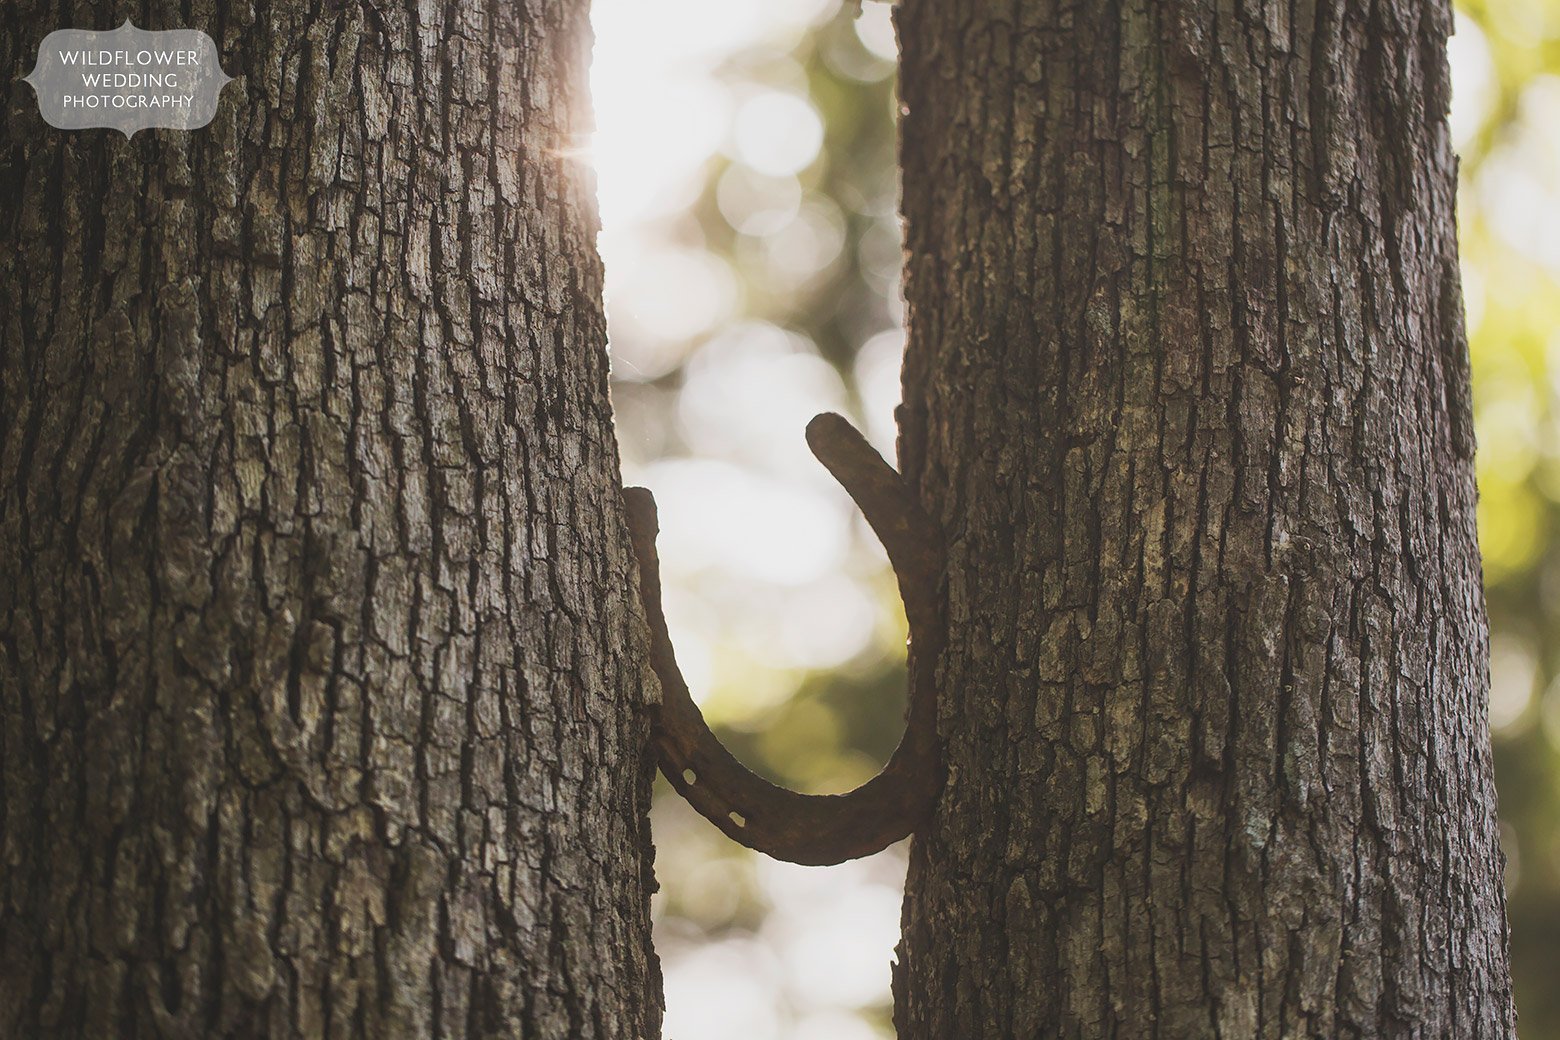 A horseshoe is caught between two trees during this rural Missouri farm photo session.